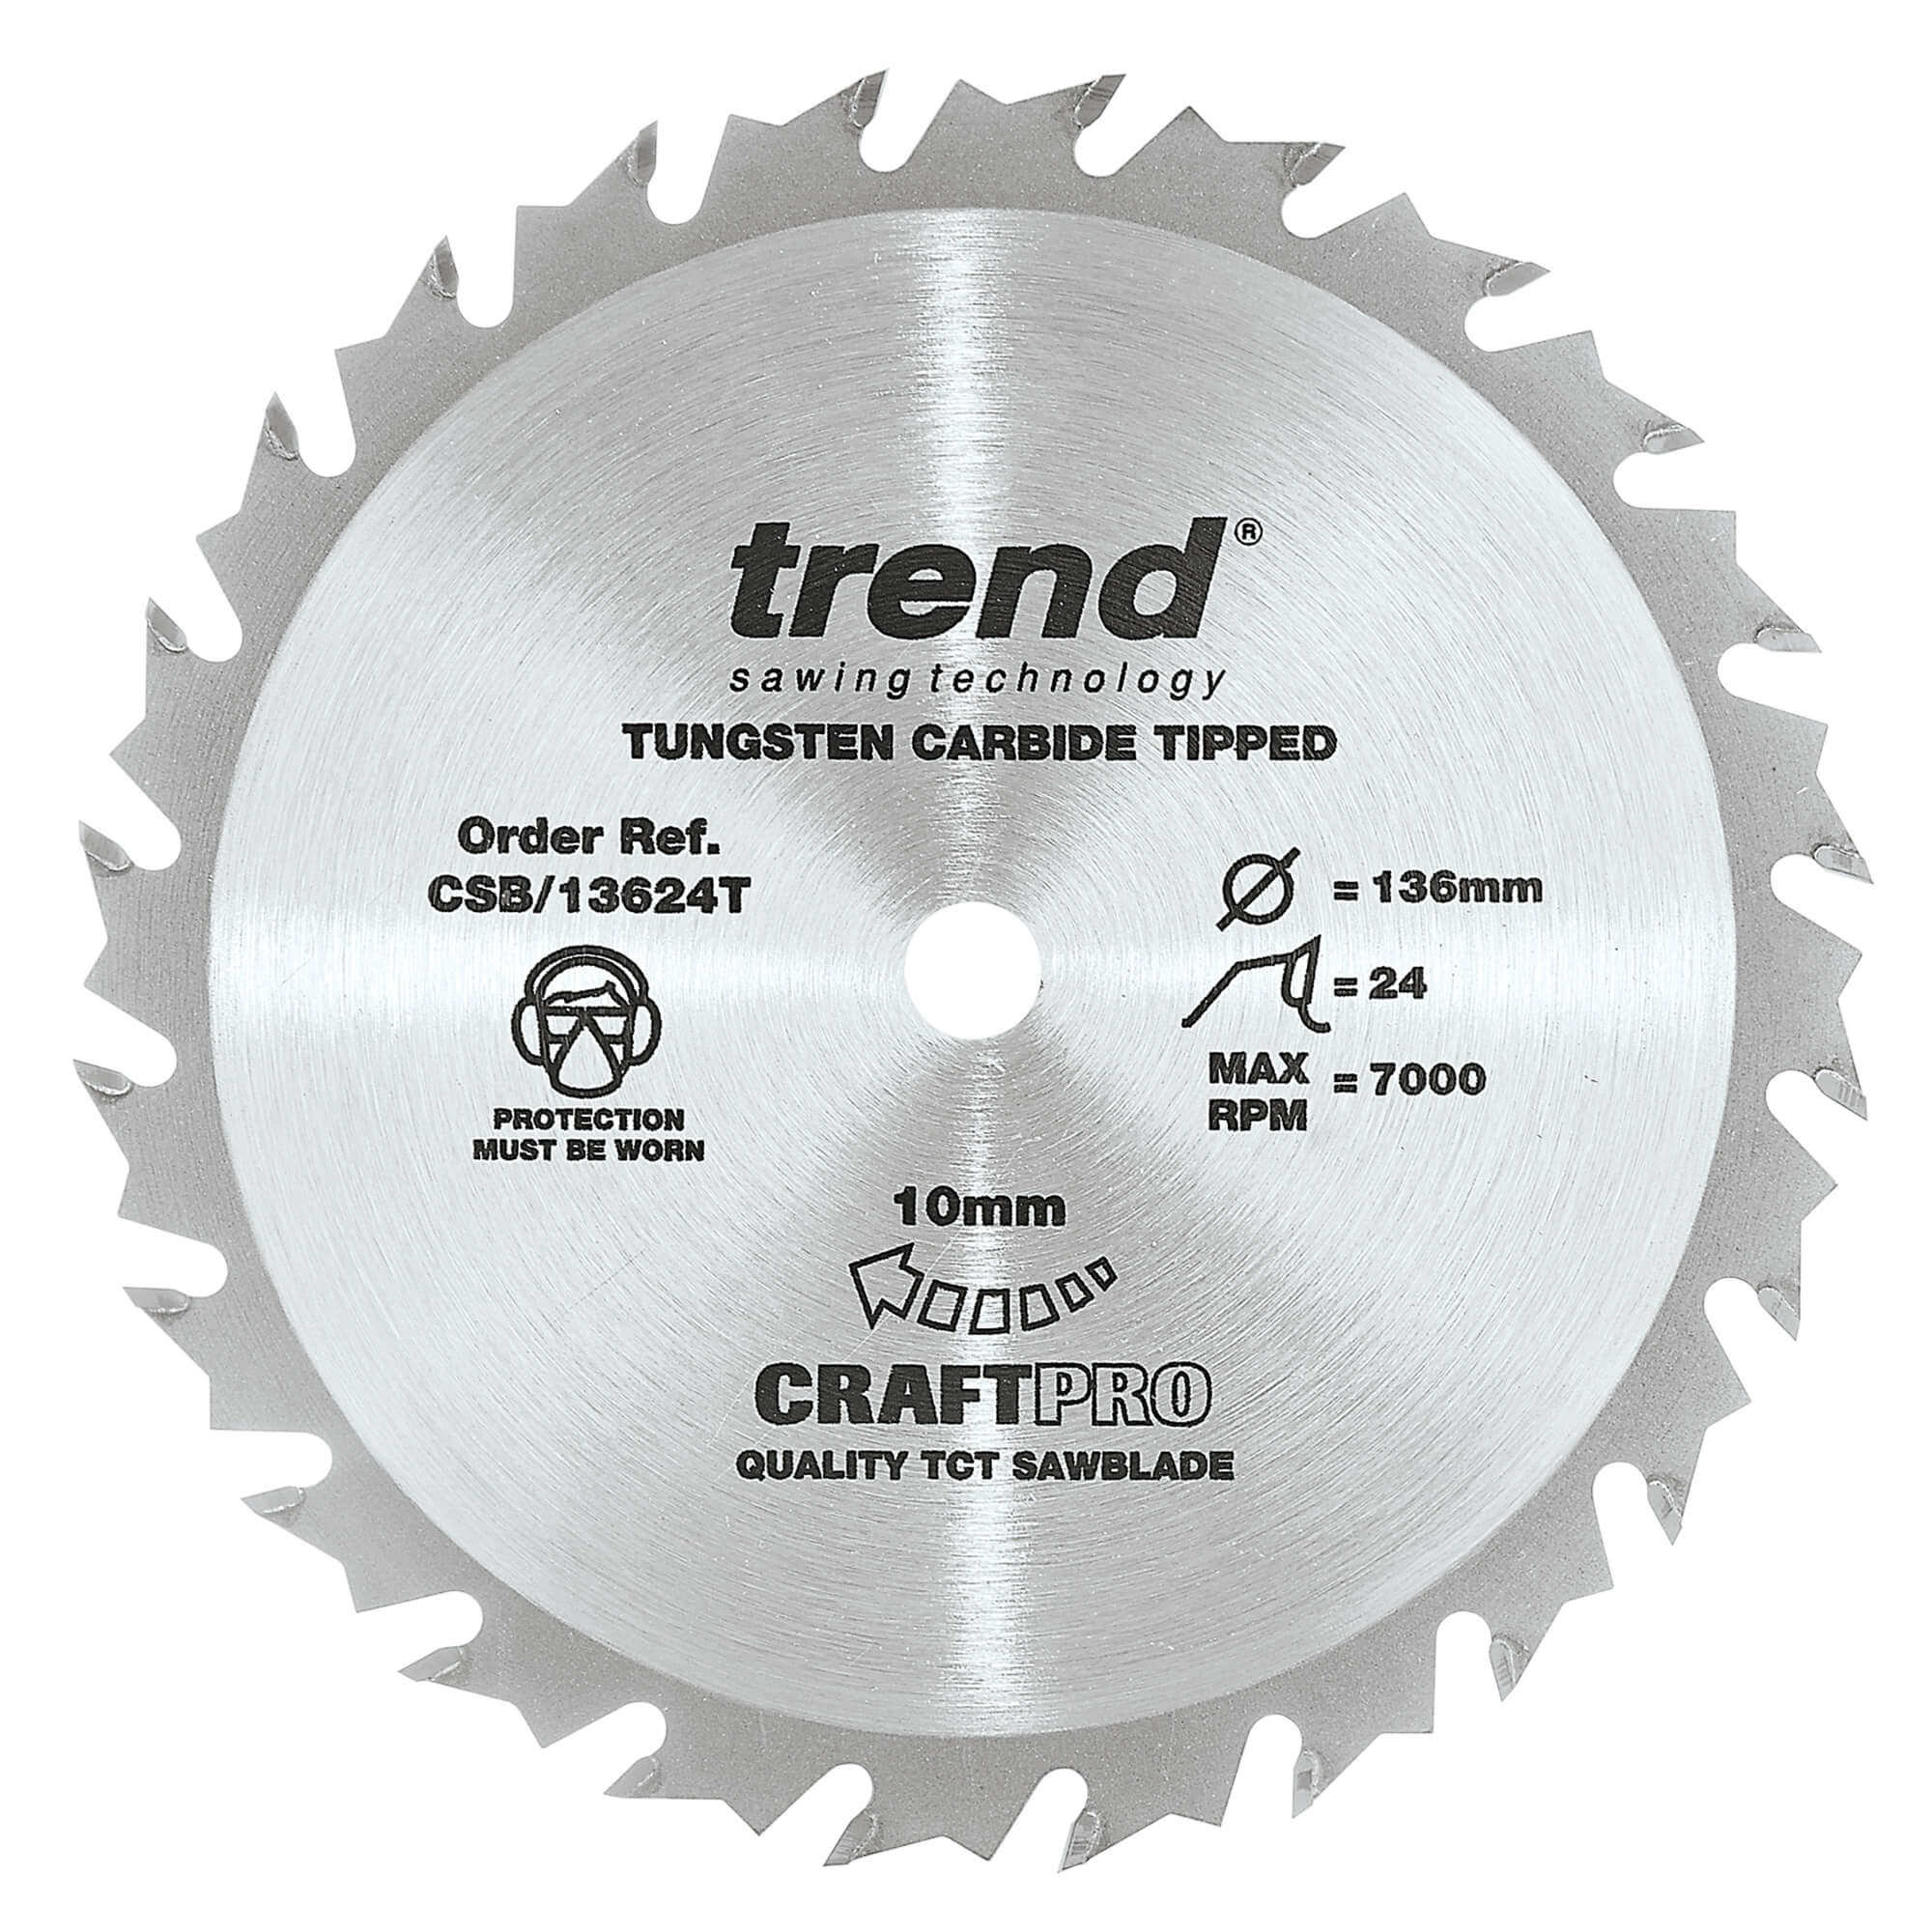 Image of Trend CRAFTPRO Wood Cutting Cordless Saw Blade 136mm 24T 10mm